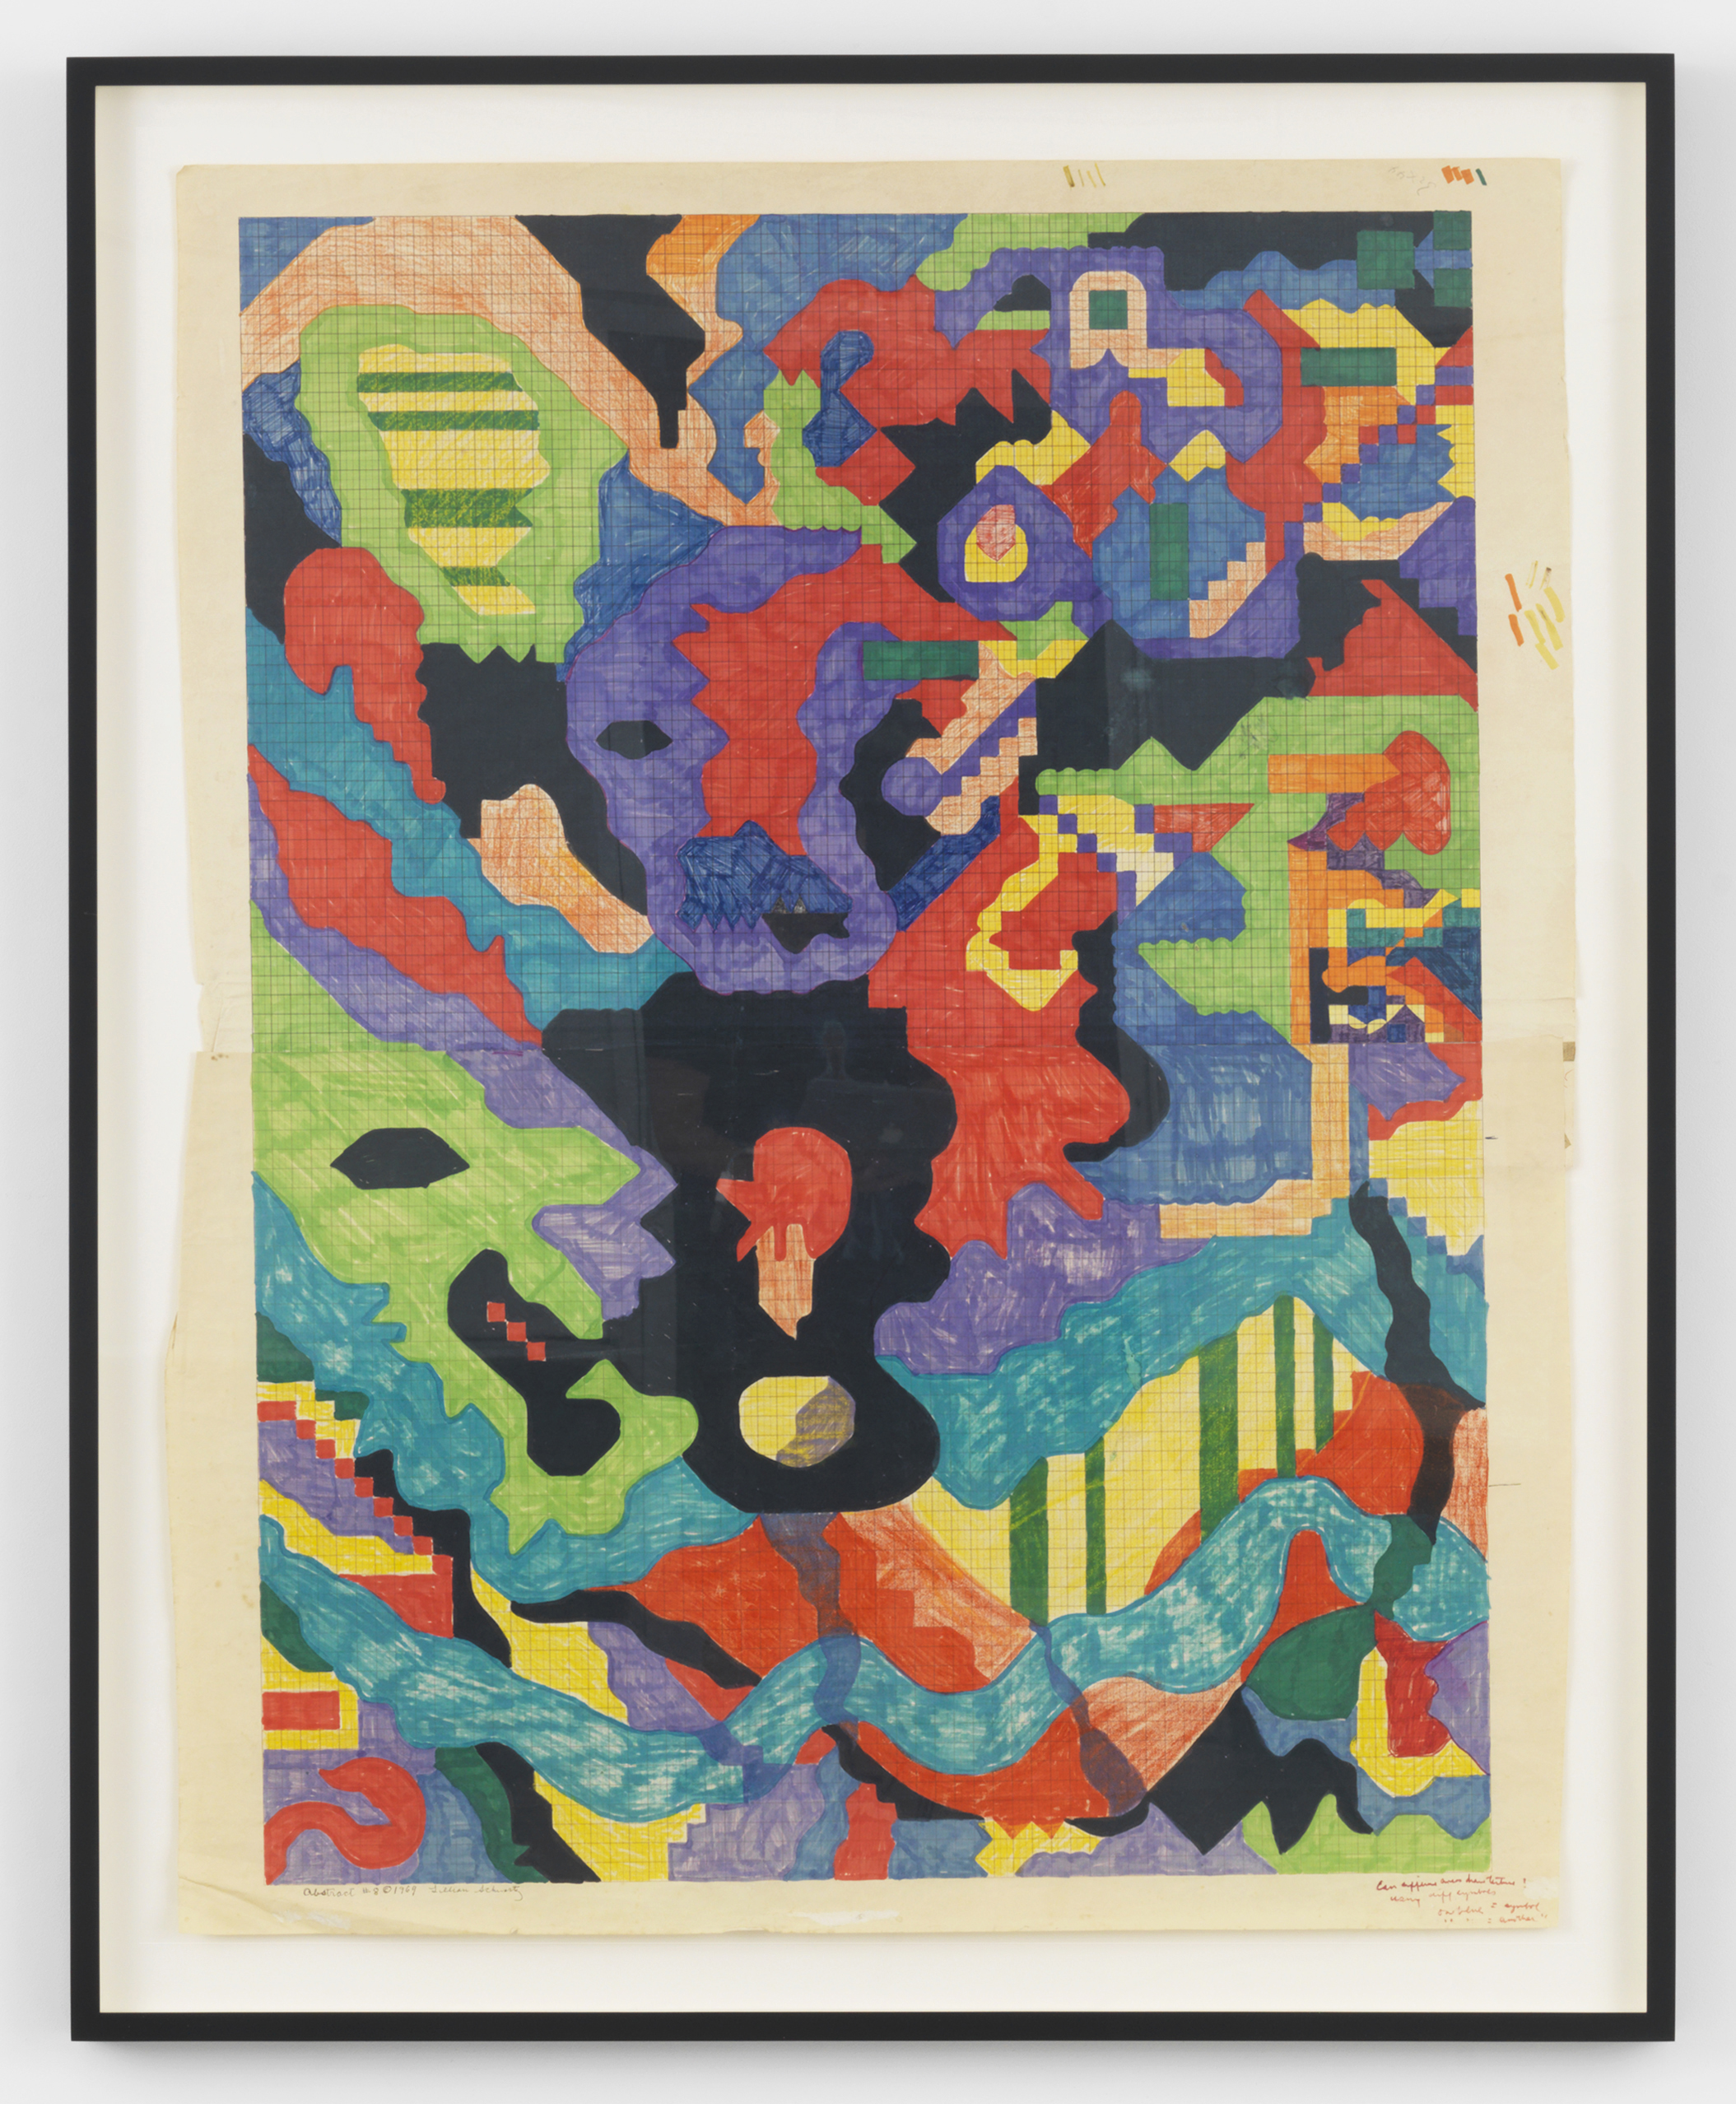 Lillian Schwartz, Abstract #8, 1969, marker and crayon on graph paper, framed: 51.375h x 41.625w in.